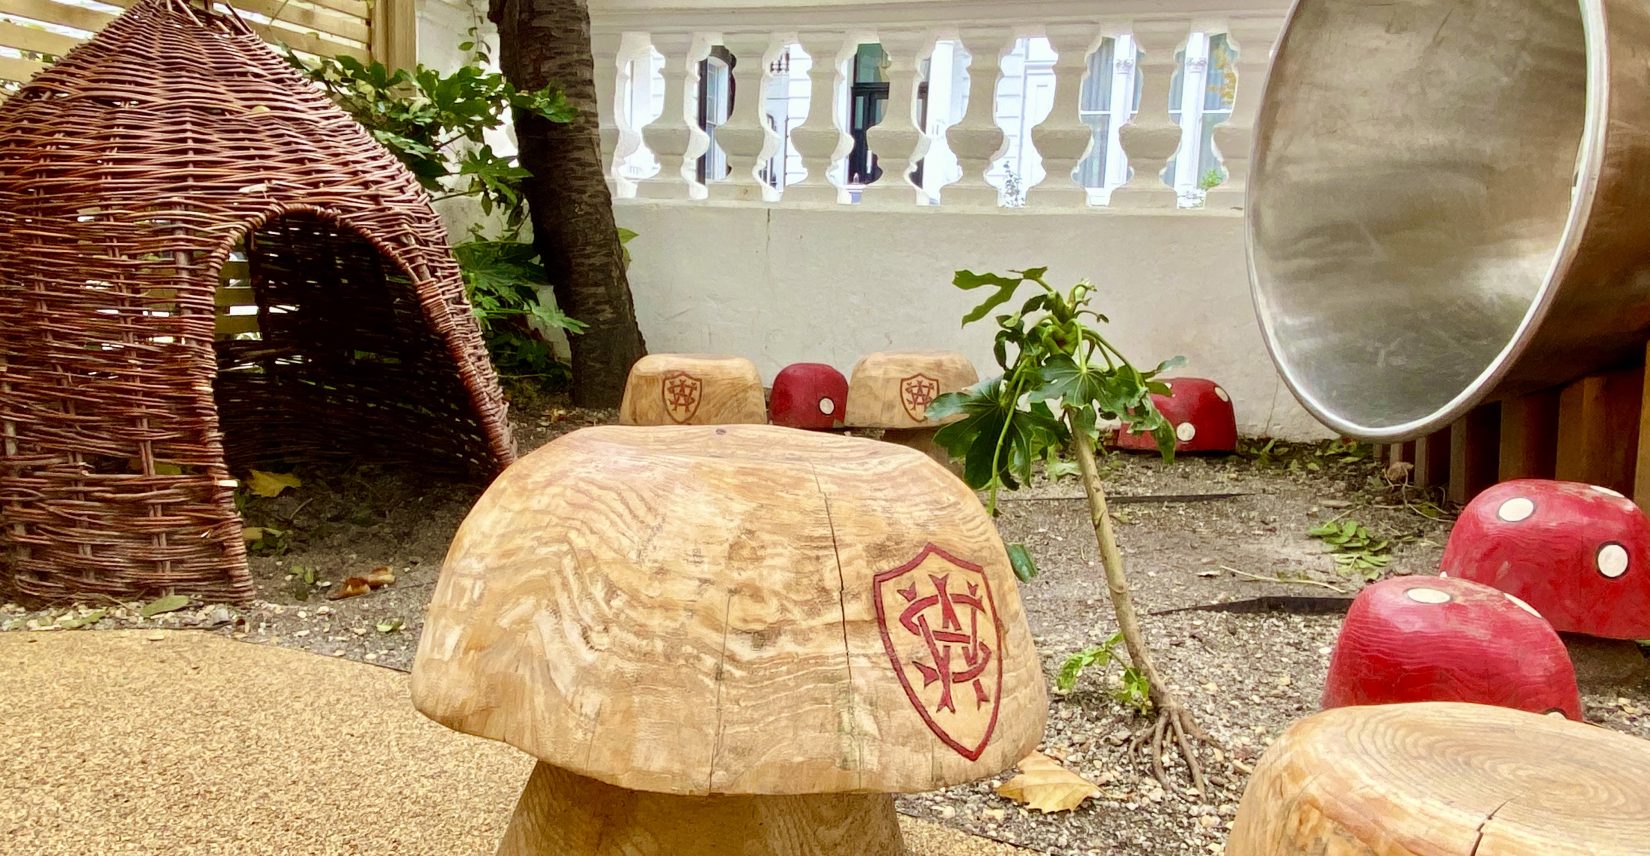 A wooden toadstool next to a wicker tent.